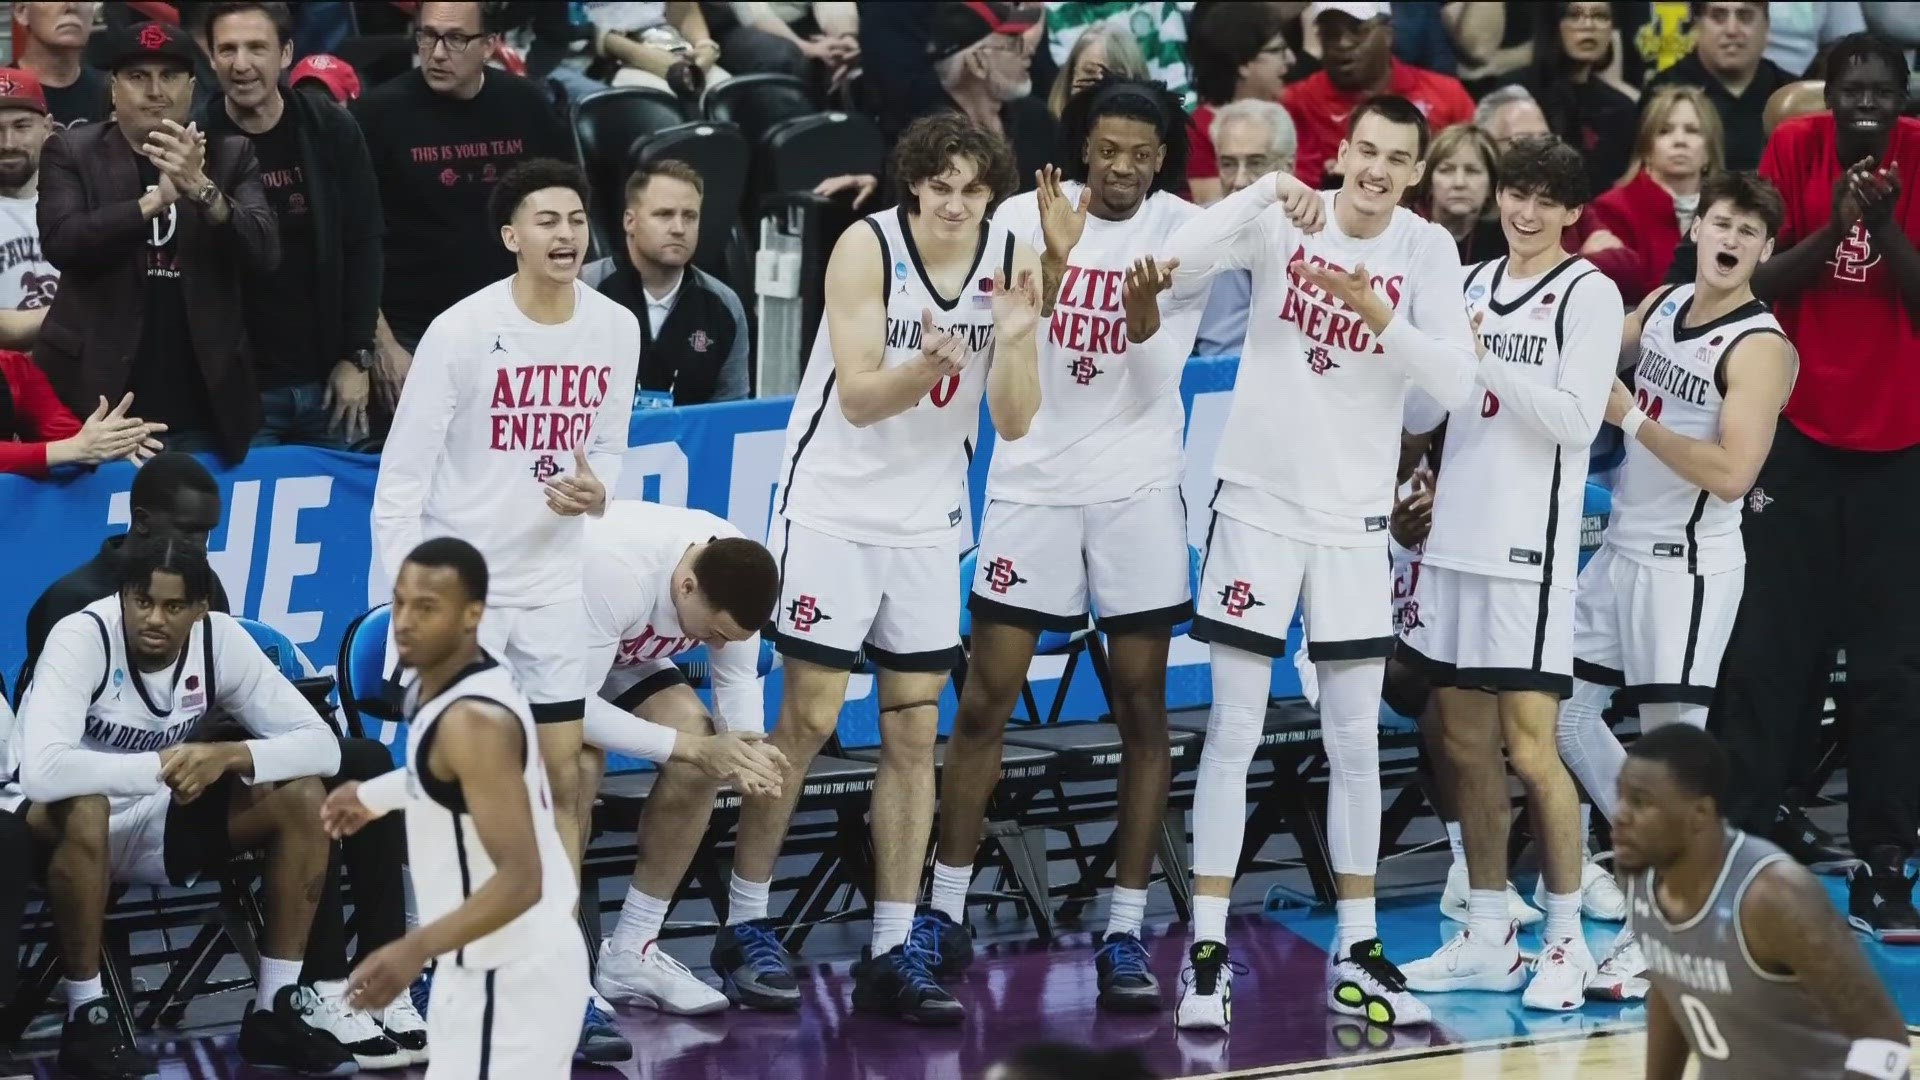 The Aztecs head to Boston, MA for their next NCAA Tournament game against UConn in the Sweet 16 on Thursday.